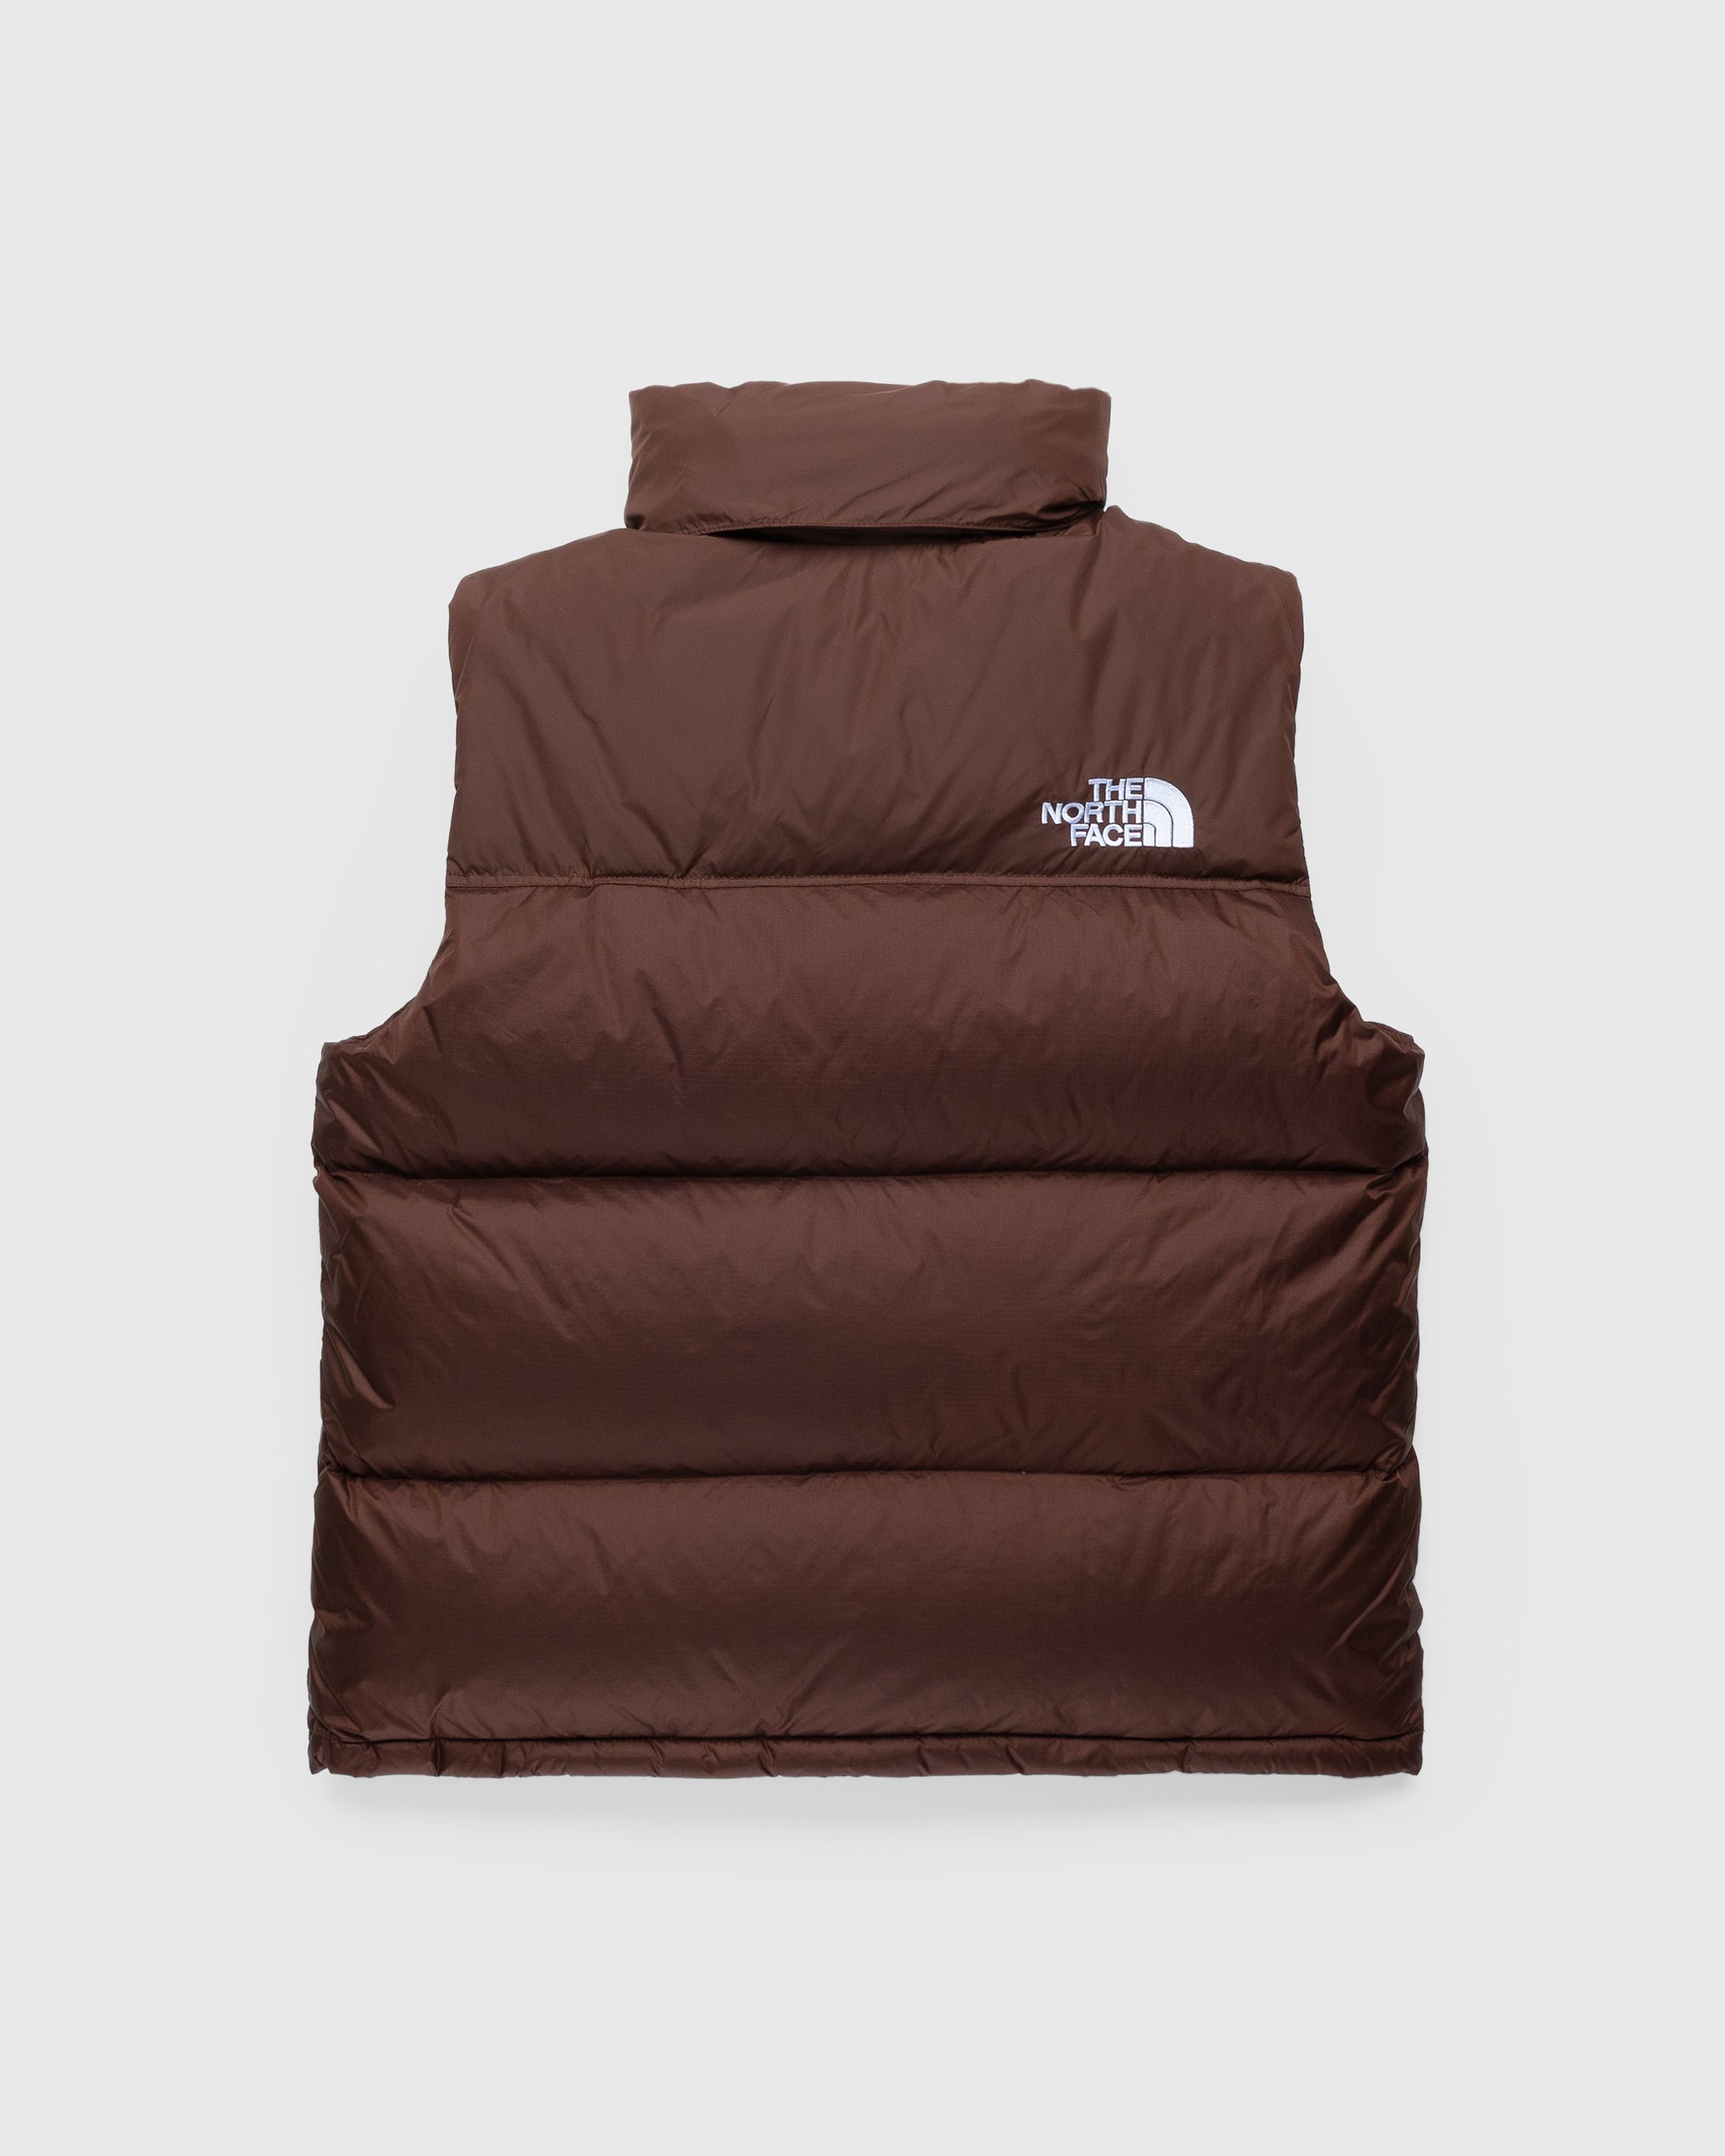 The North Face - Insulated Himalayan Vest Dark Oak - Clothing - Beige - Image 2